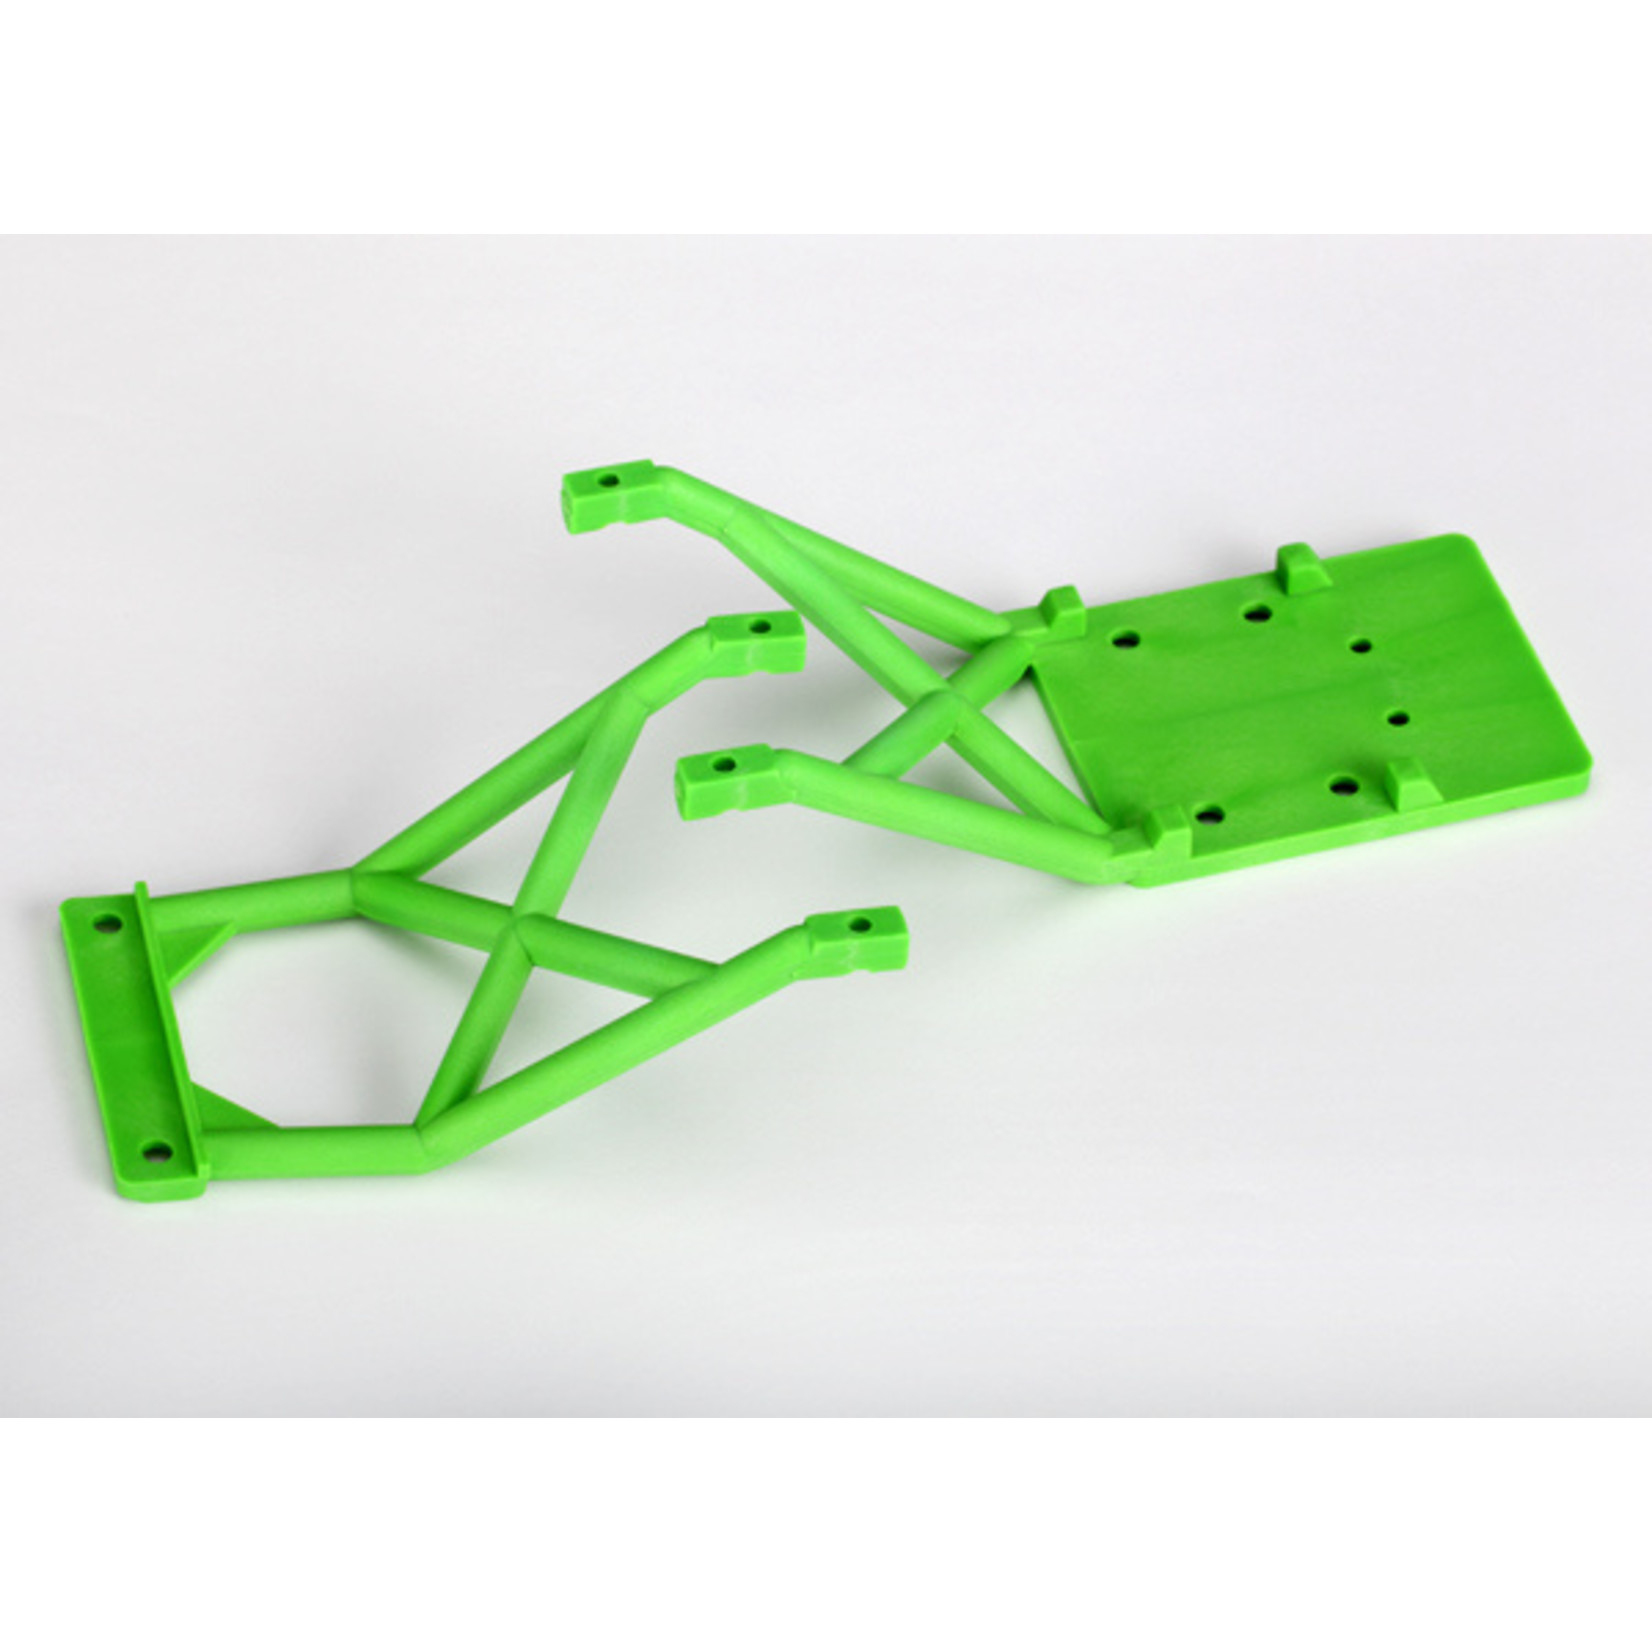 Traxxas 3623A - Skid plates, front & rear (green)